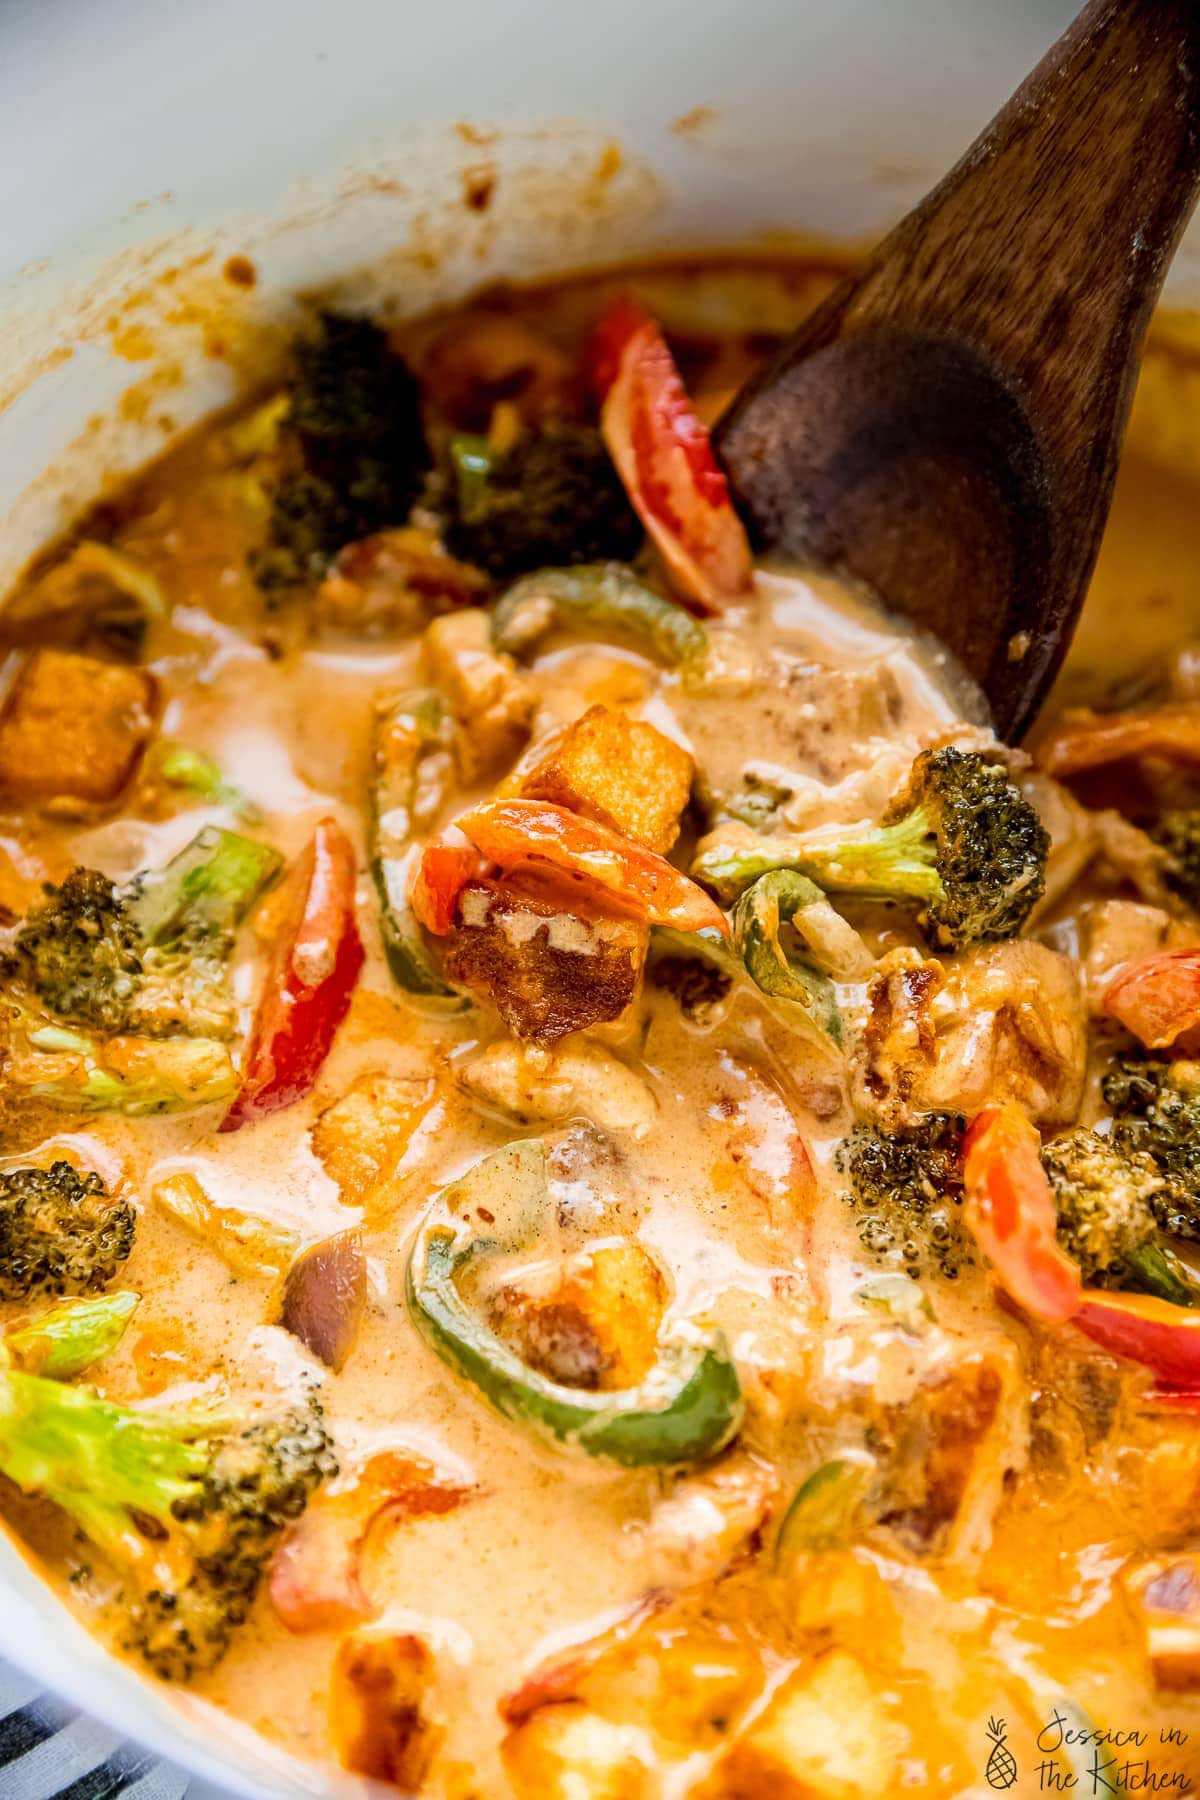 Wooden spoon stirring Thai red curry